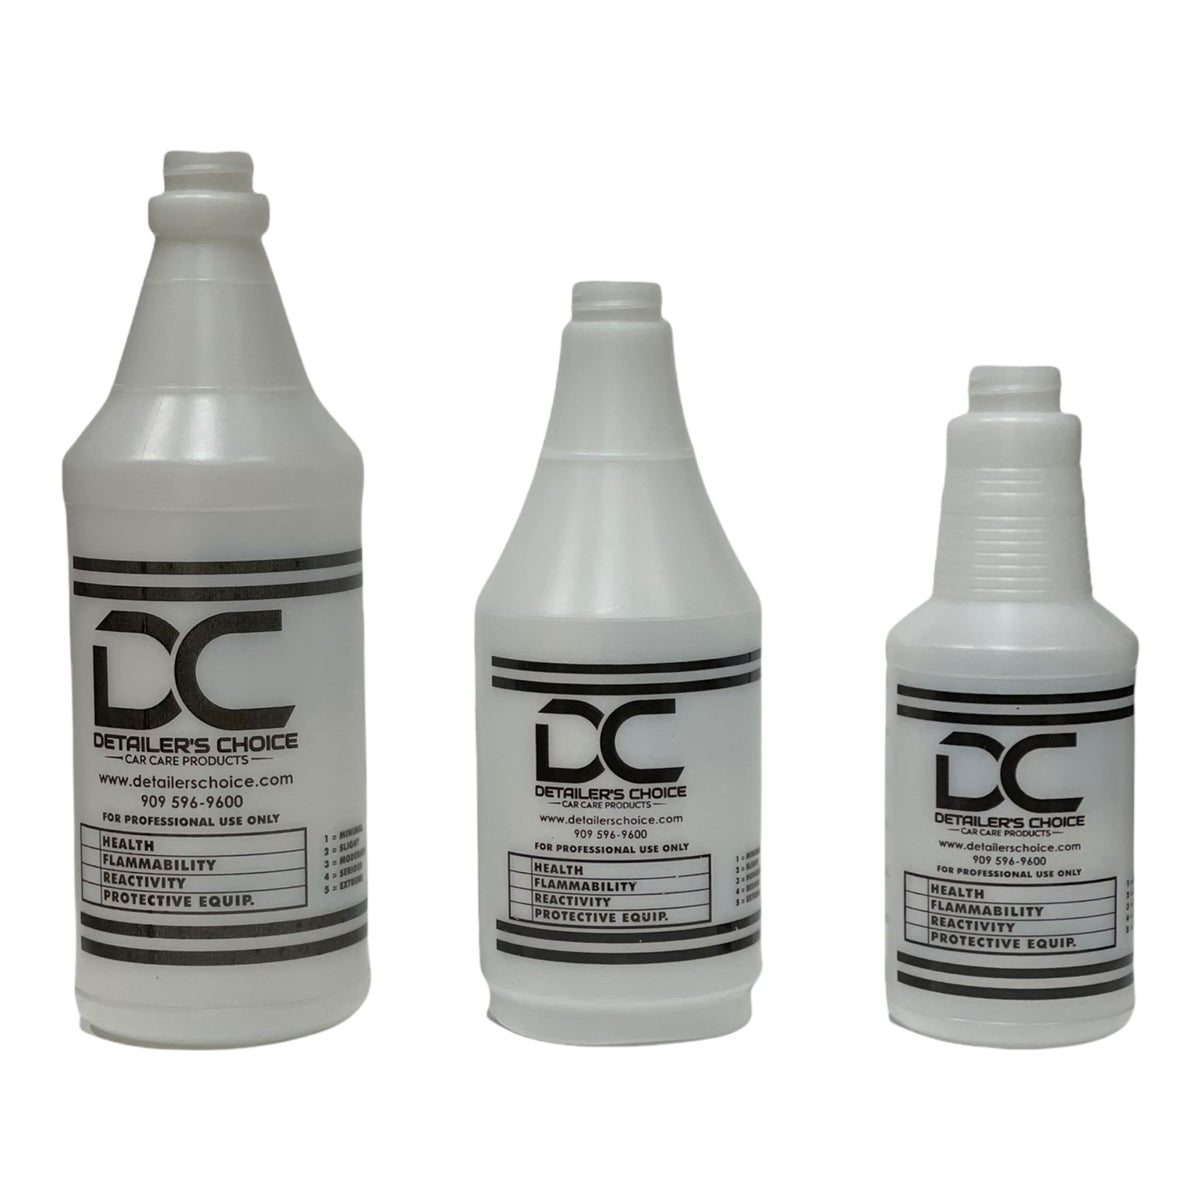 Everydayshowcar - Empty spray bottles are great for car detailing. They let  you create and store various different solutions. Here are the best spray  bottles for car detailing products:  bottles-for-car-detailing/ #Cars